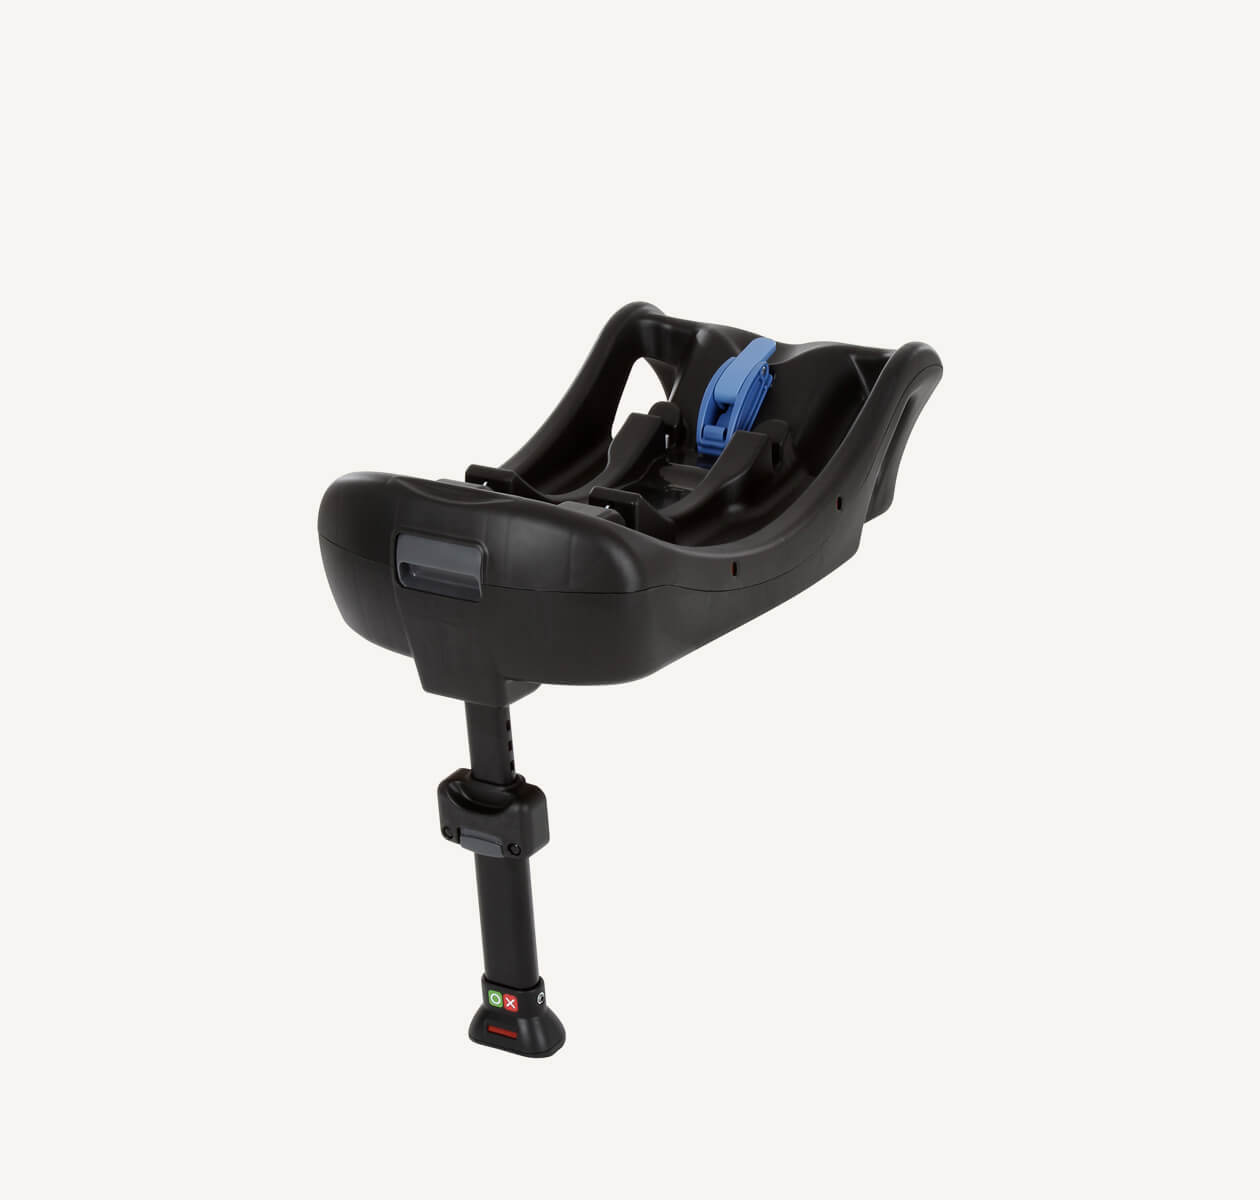   The Joie clickFIT child car seat base at an angle facing to the left.